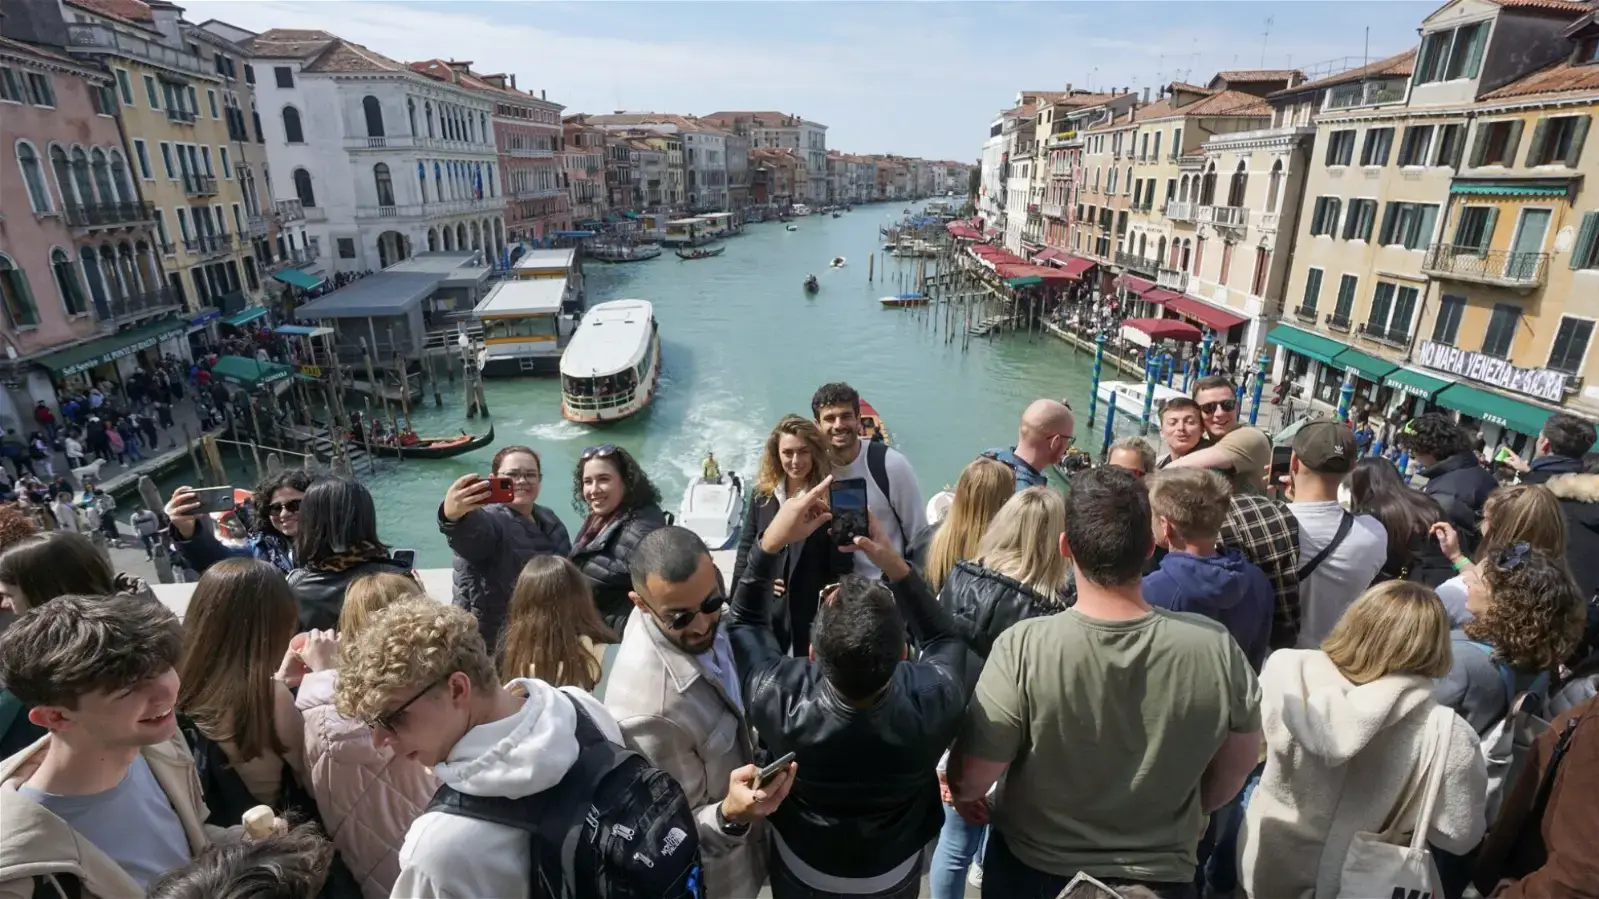 Venice wants to combat ‘overtourism’ with new €5 entrance fee